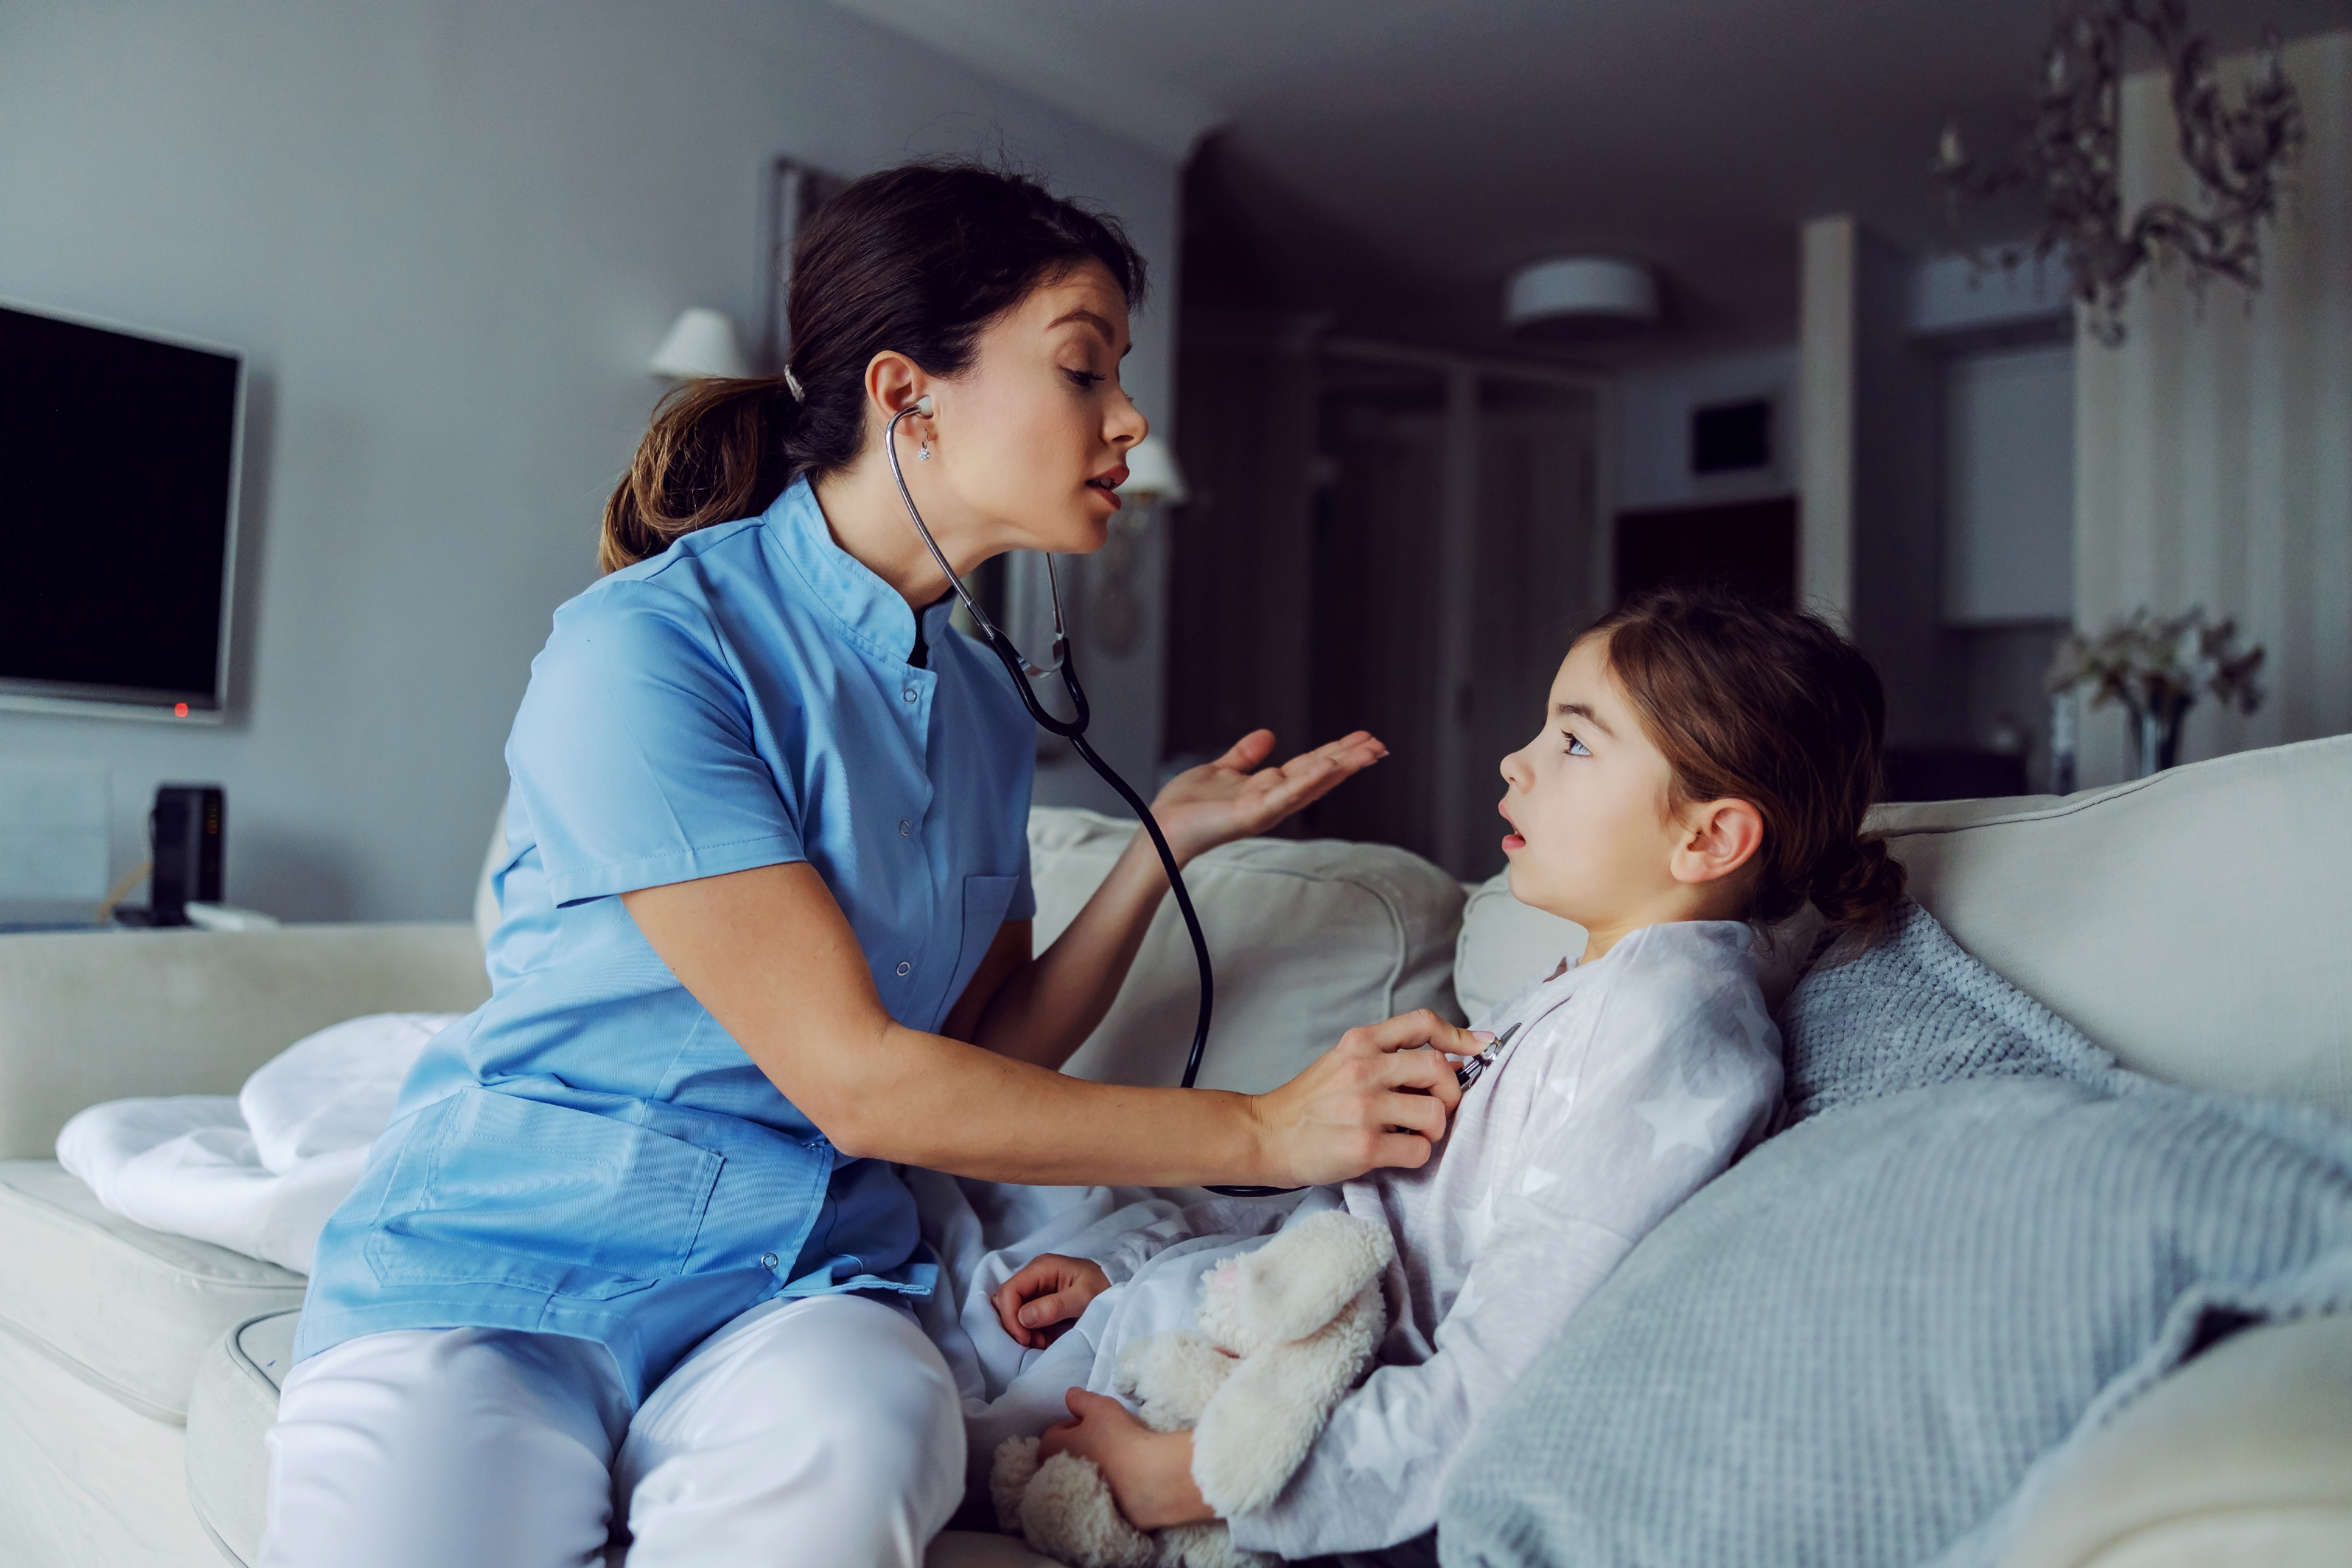 Doctor sitting on sofa next to girl and examining her lungs with stethoscope | Source: Shutterstock.com